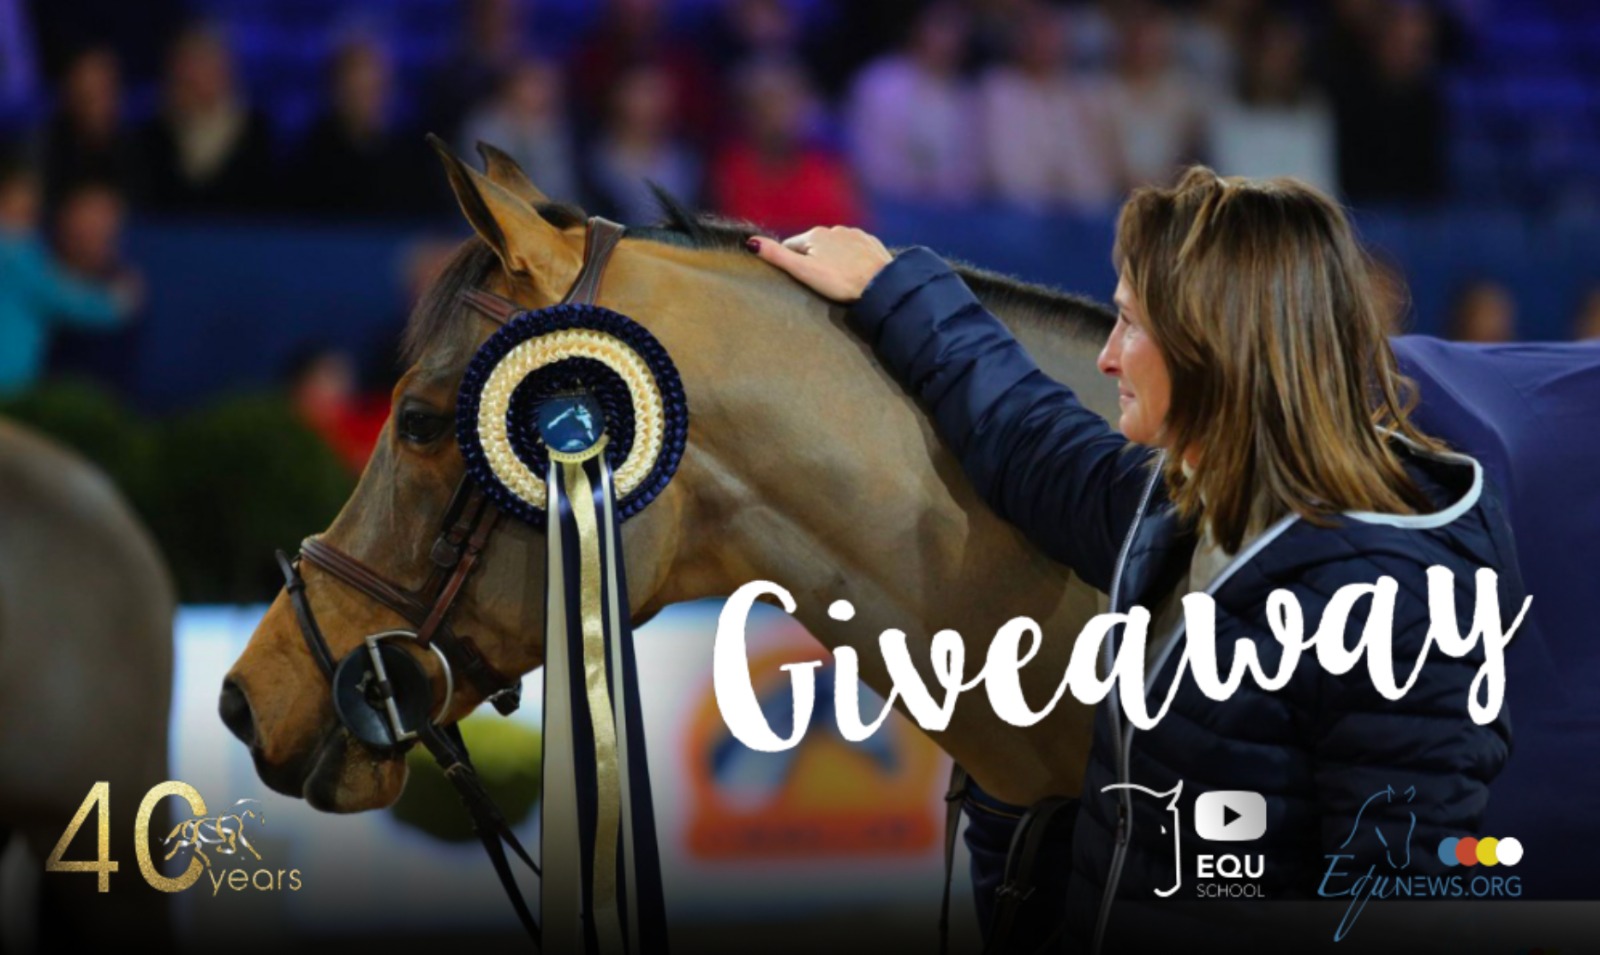 GIVEAWAY: Equnews is giving away free Jumping Mechelen tickets!